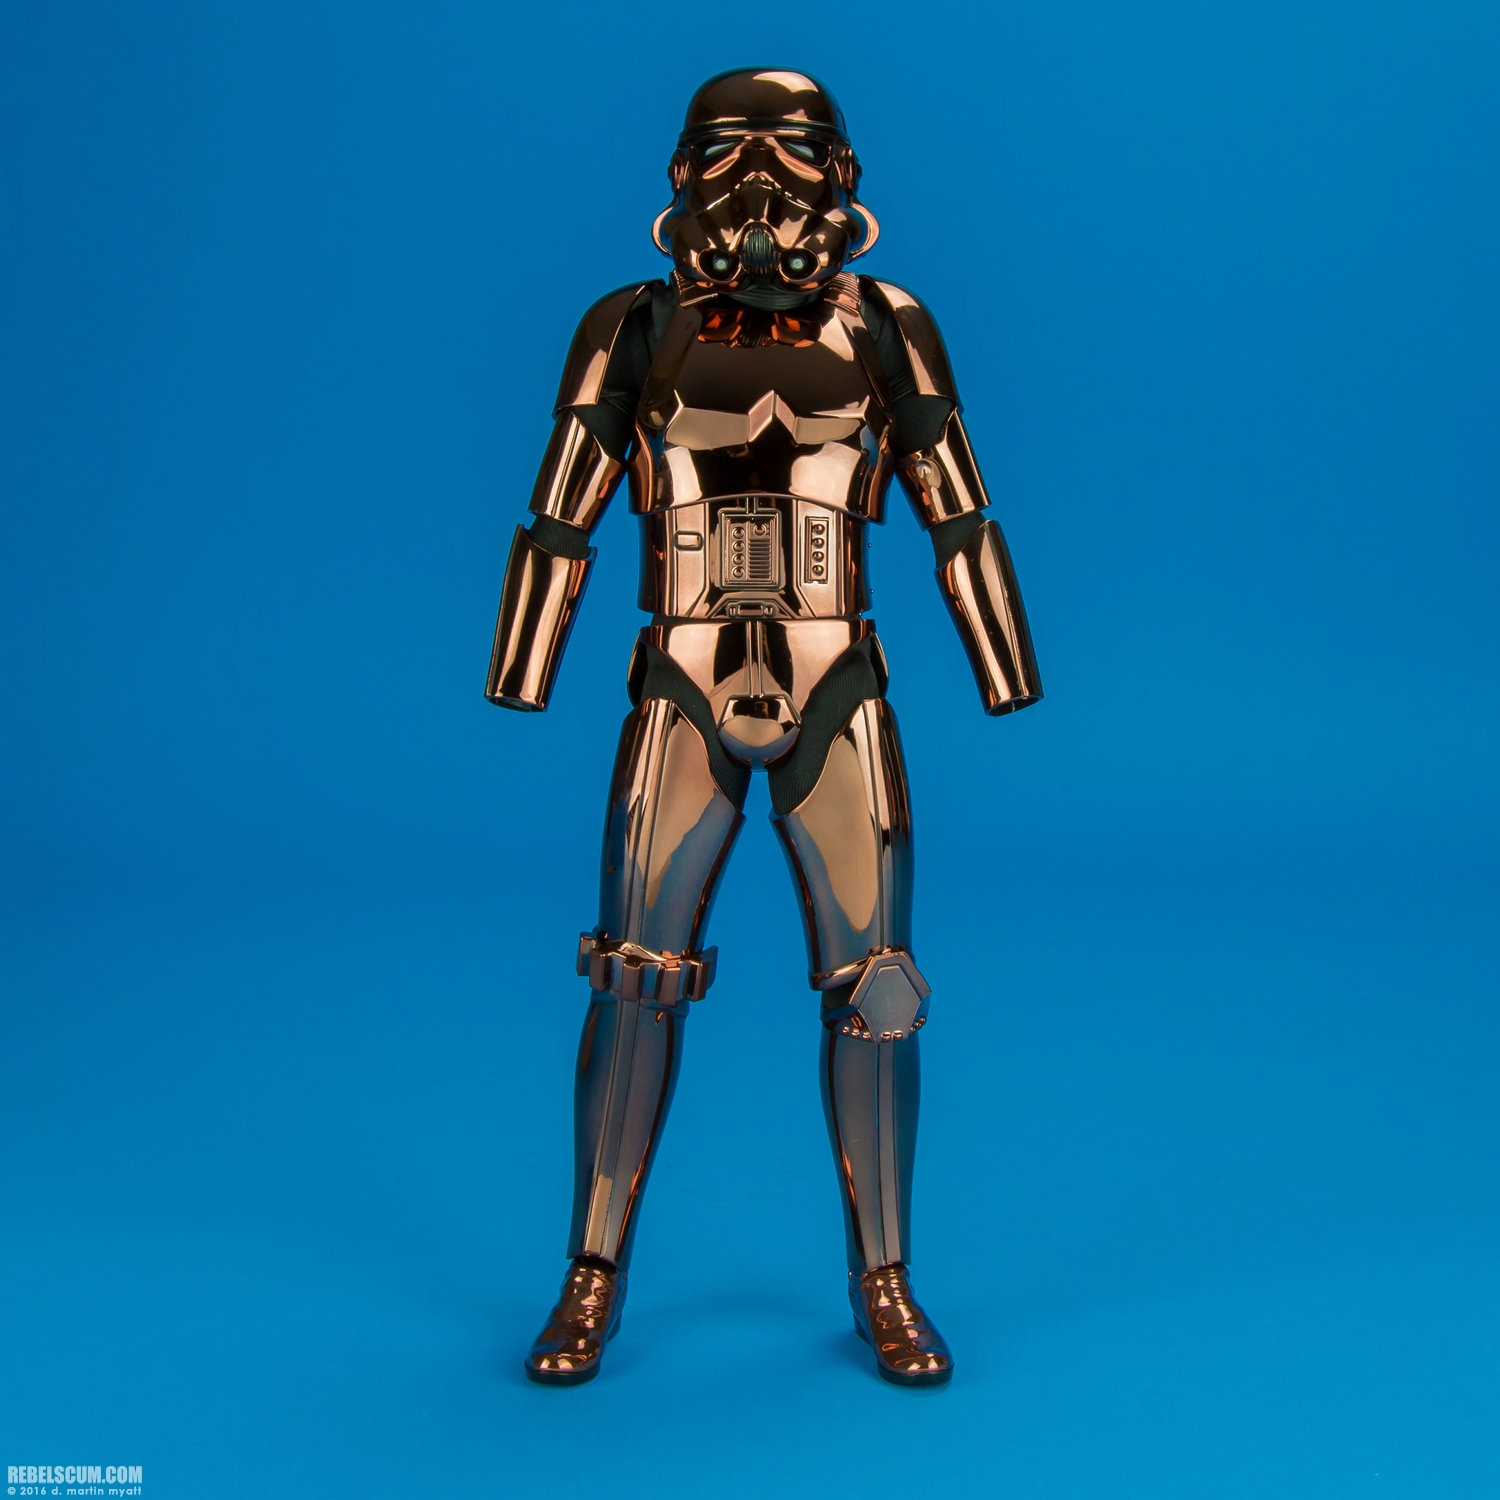 Hot-Toys-MMS330-Copper-Chrome-Stromtrooper-Collectible-Figure-006.jpg